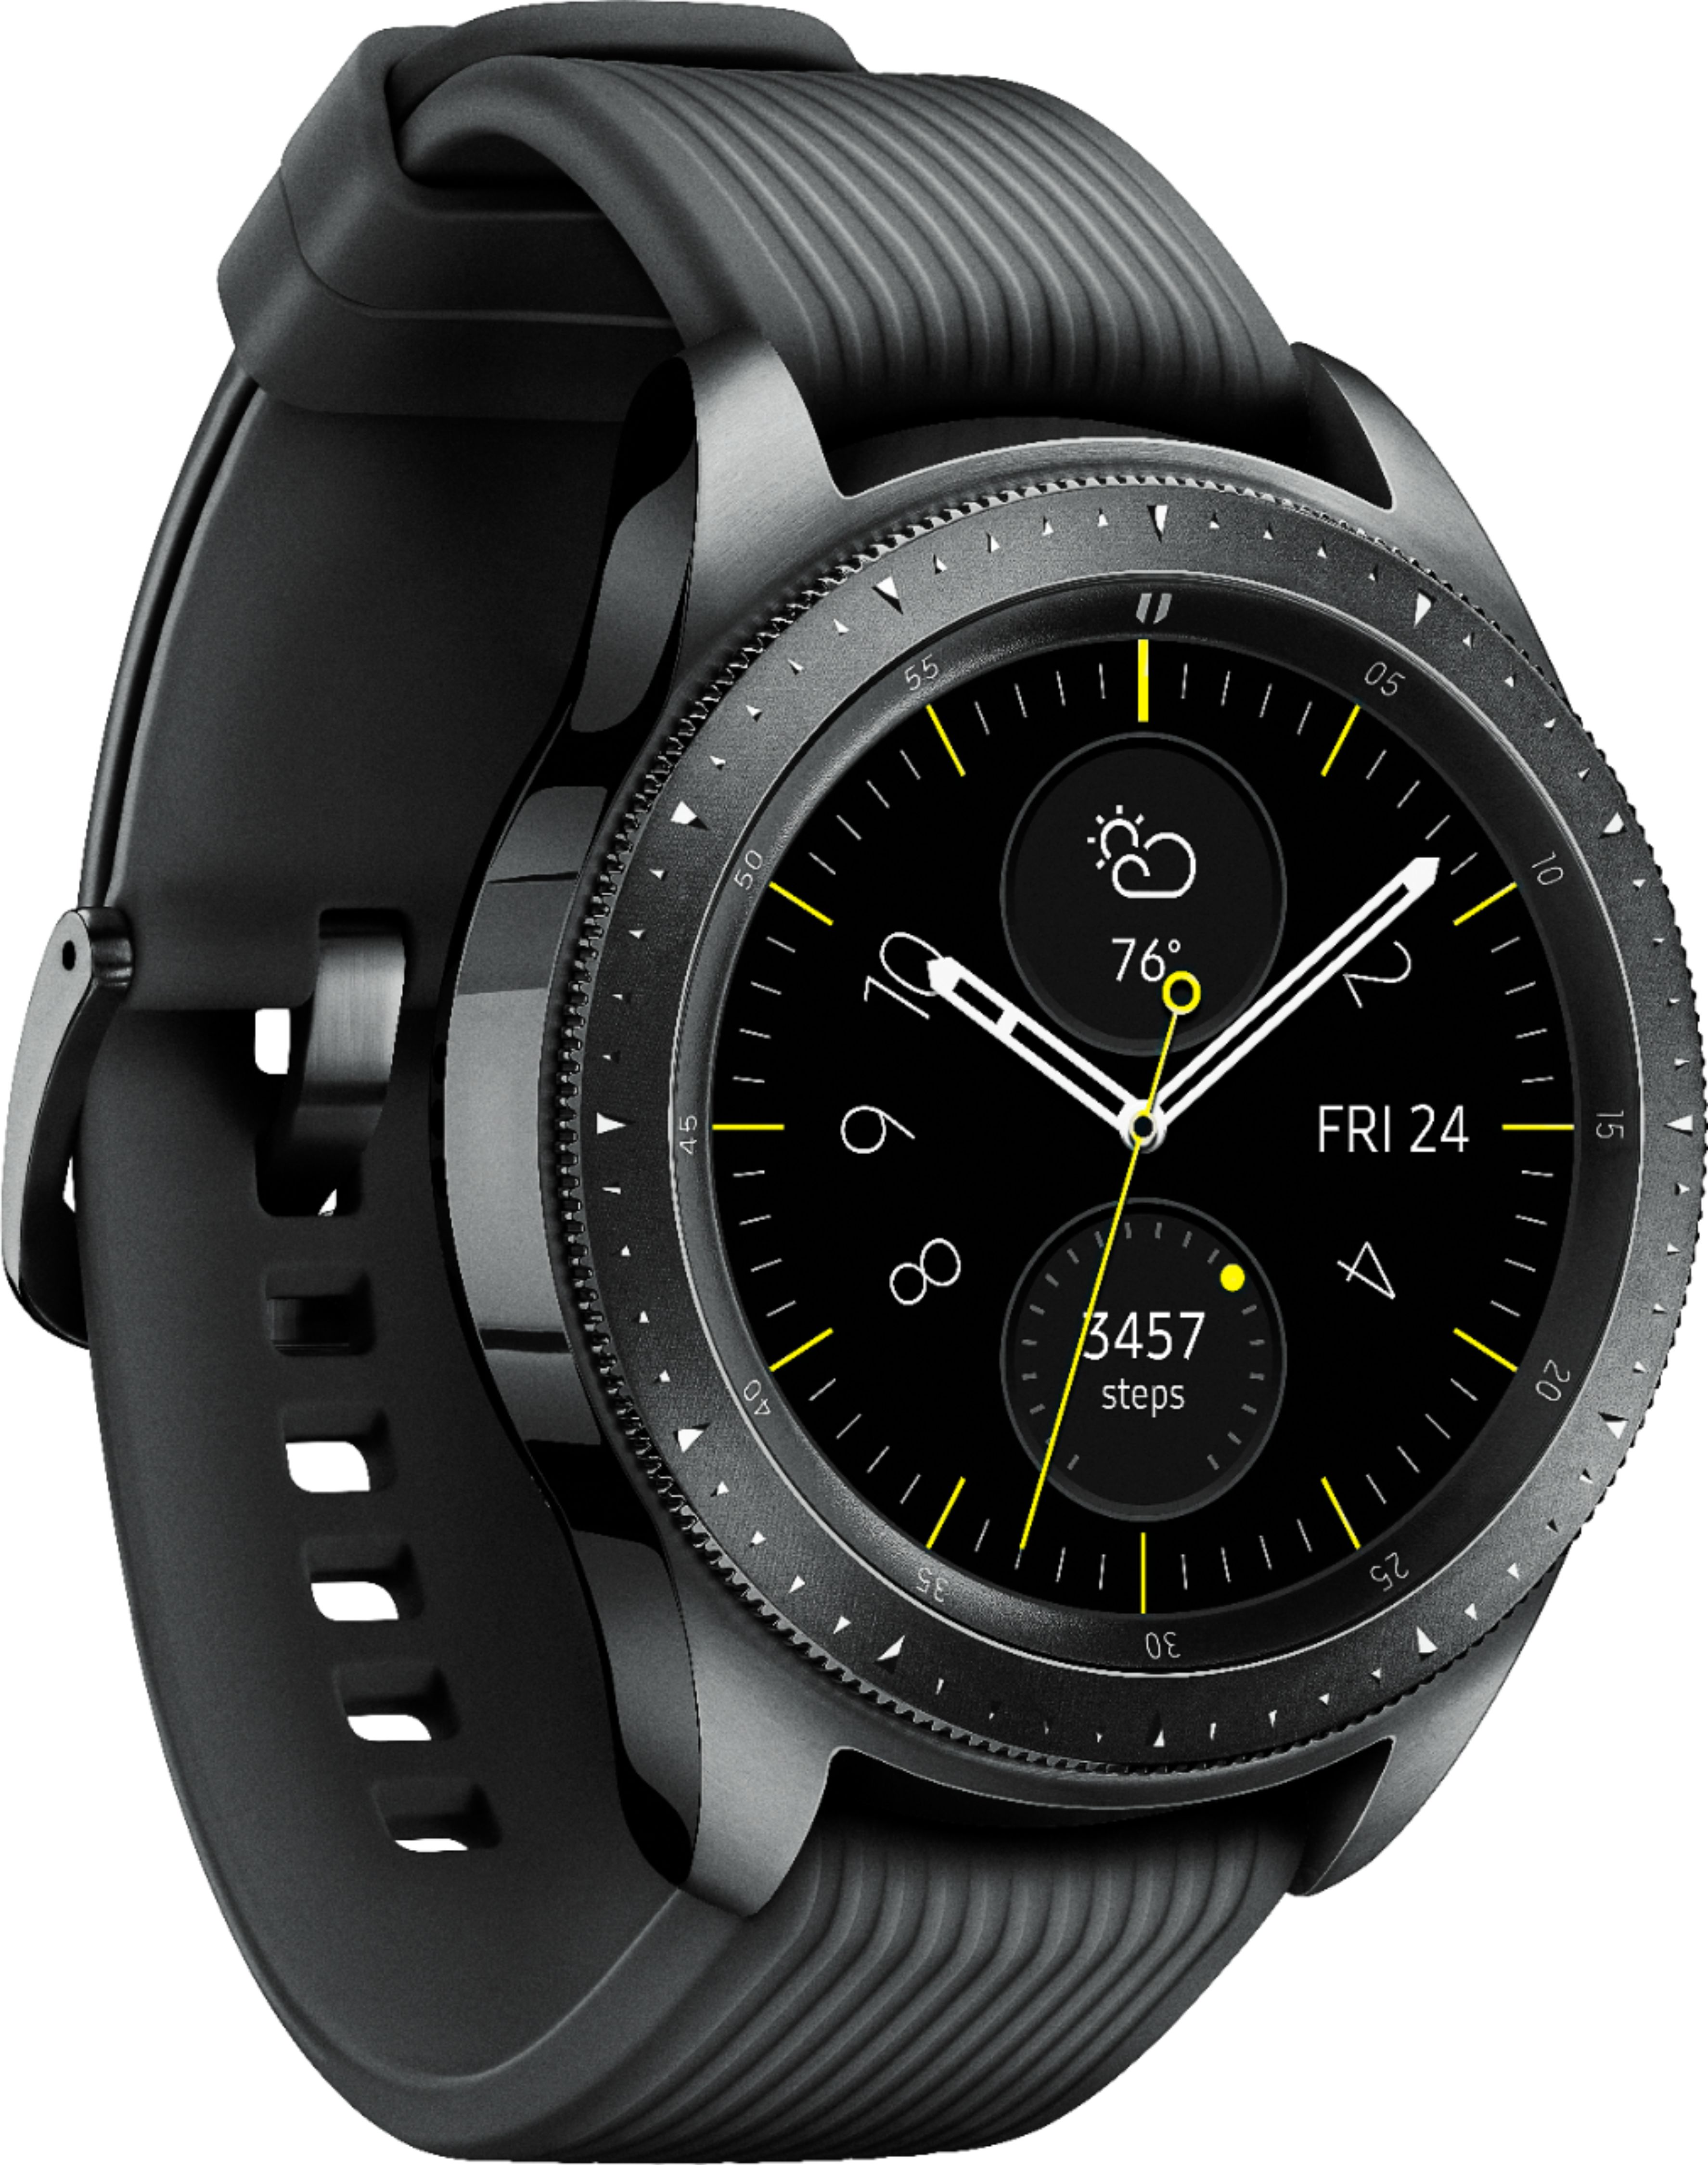 Questions and Answers: Samsung Galaxy Watch Smartwatch 42mm Stainless ...